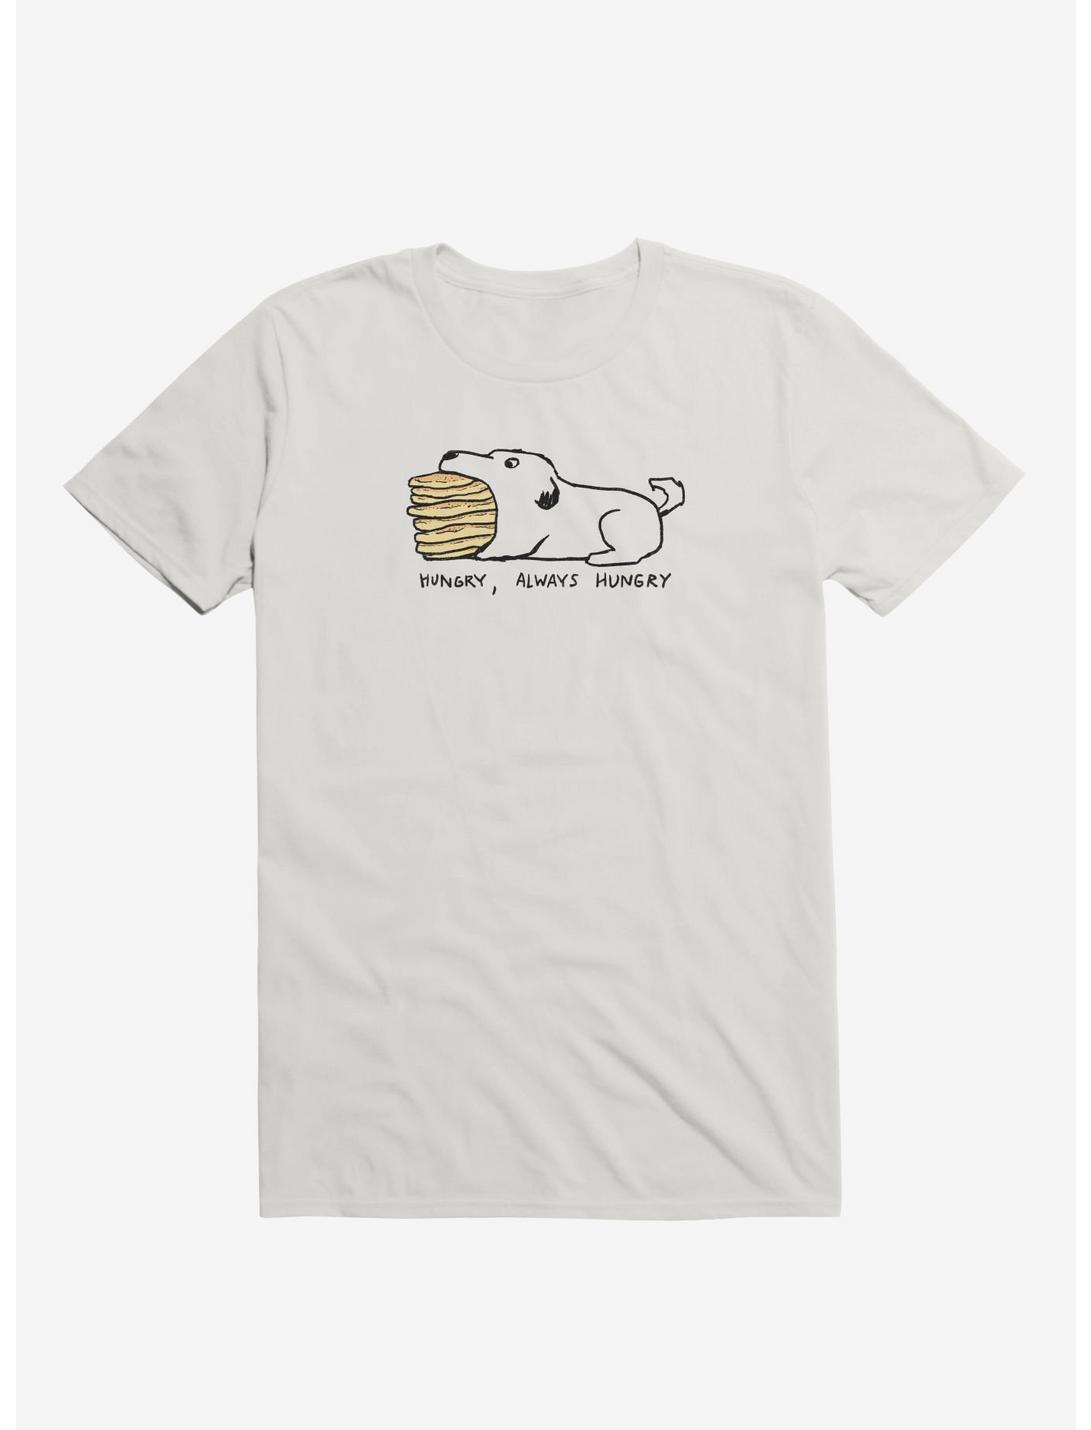 Hungry, Always Hungry T-Shirt, WHITE, hi-res